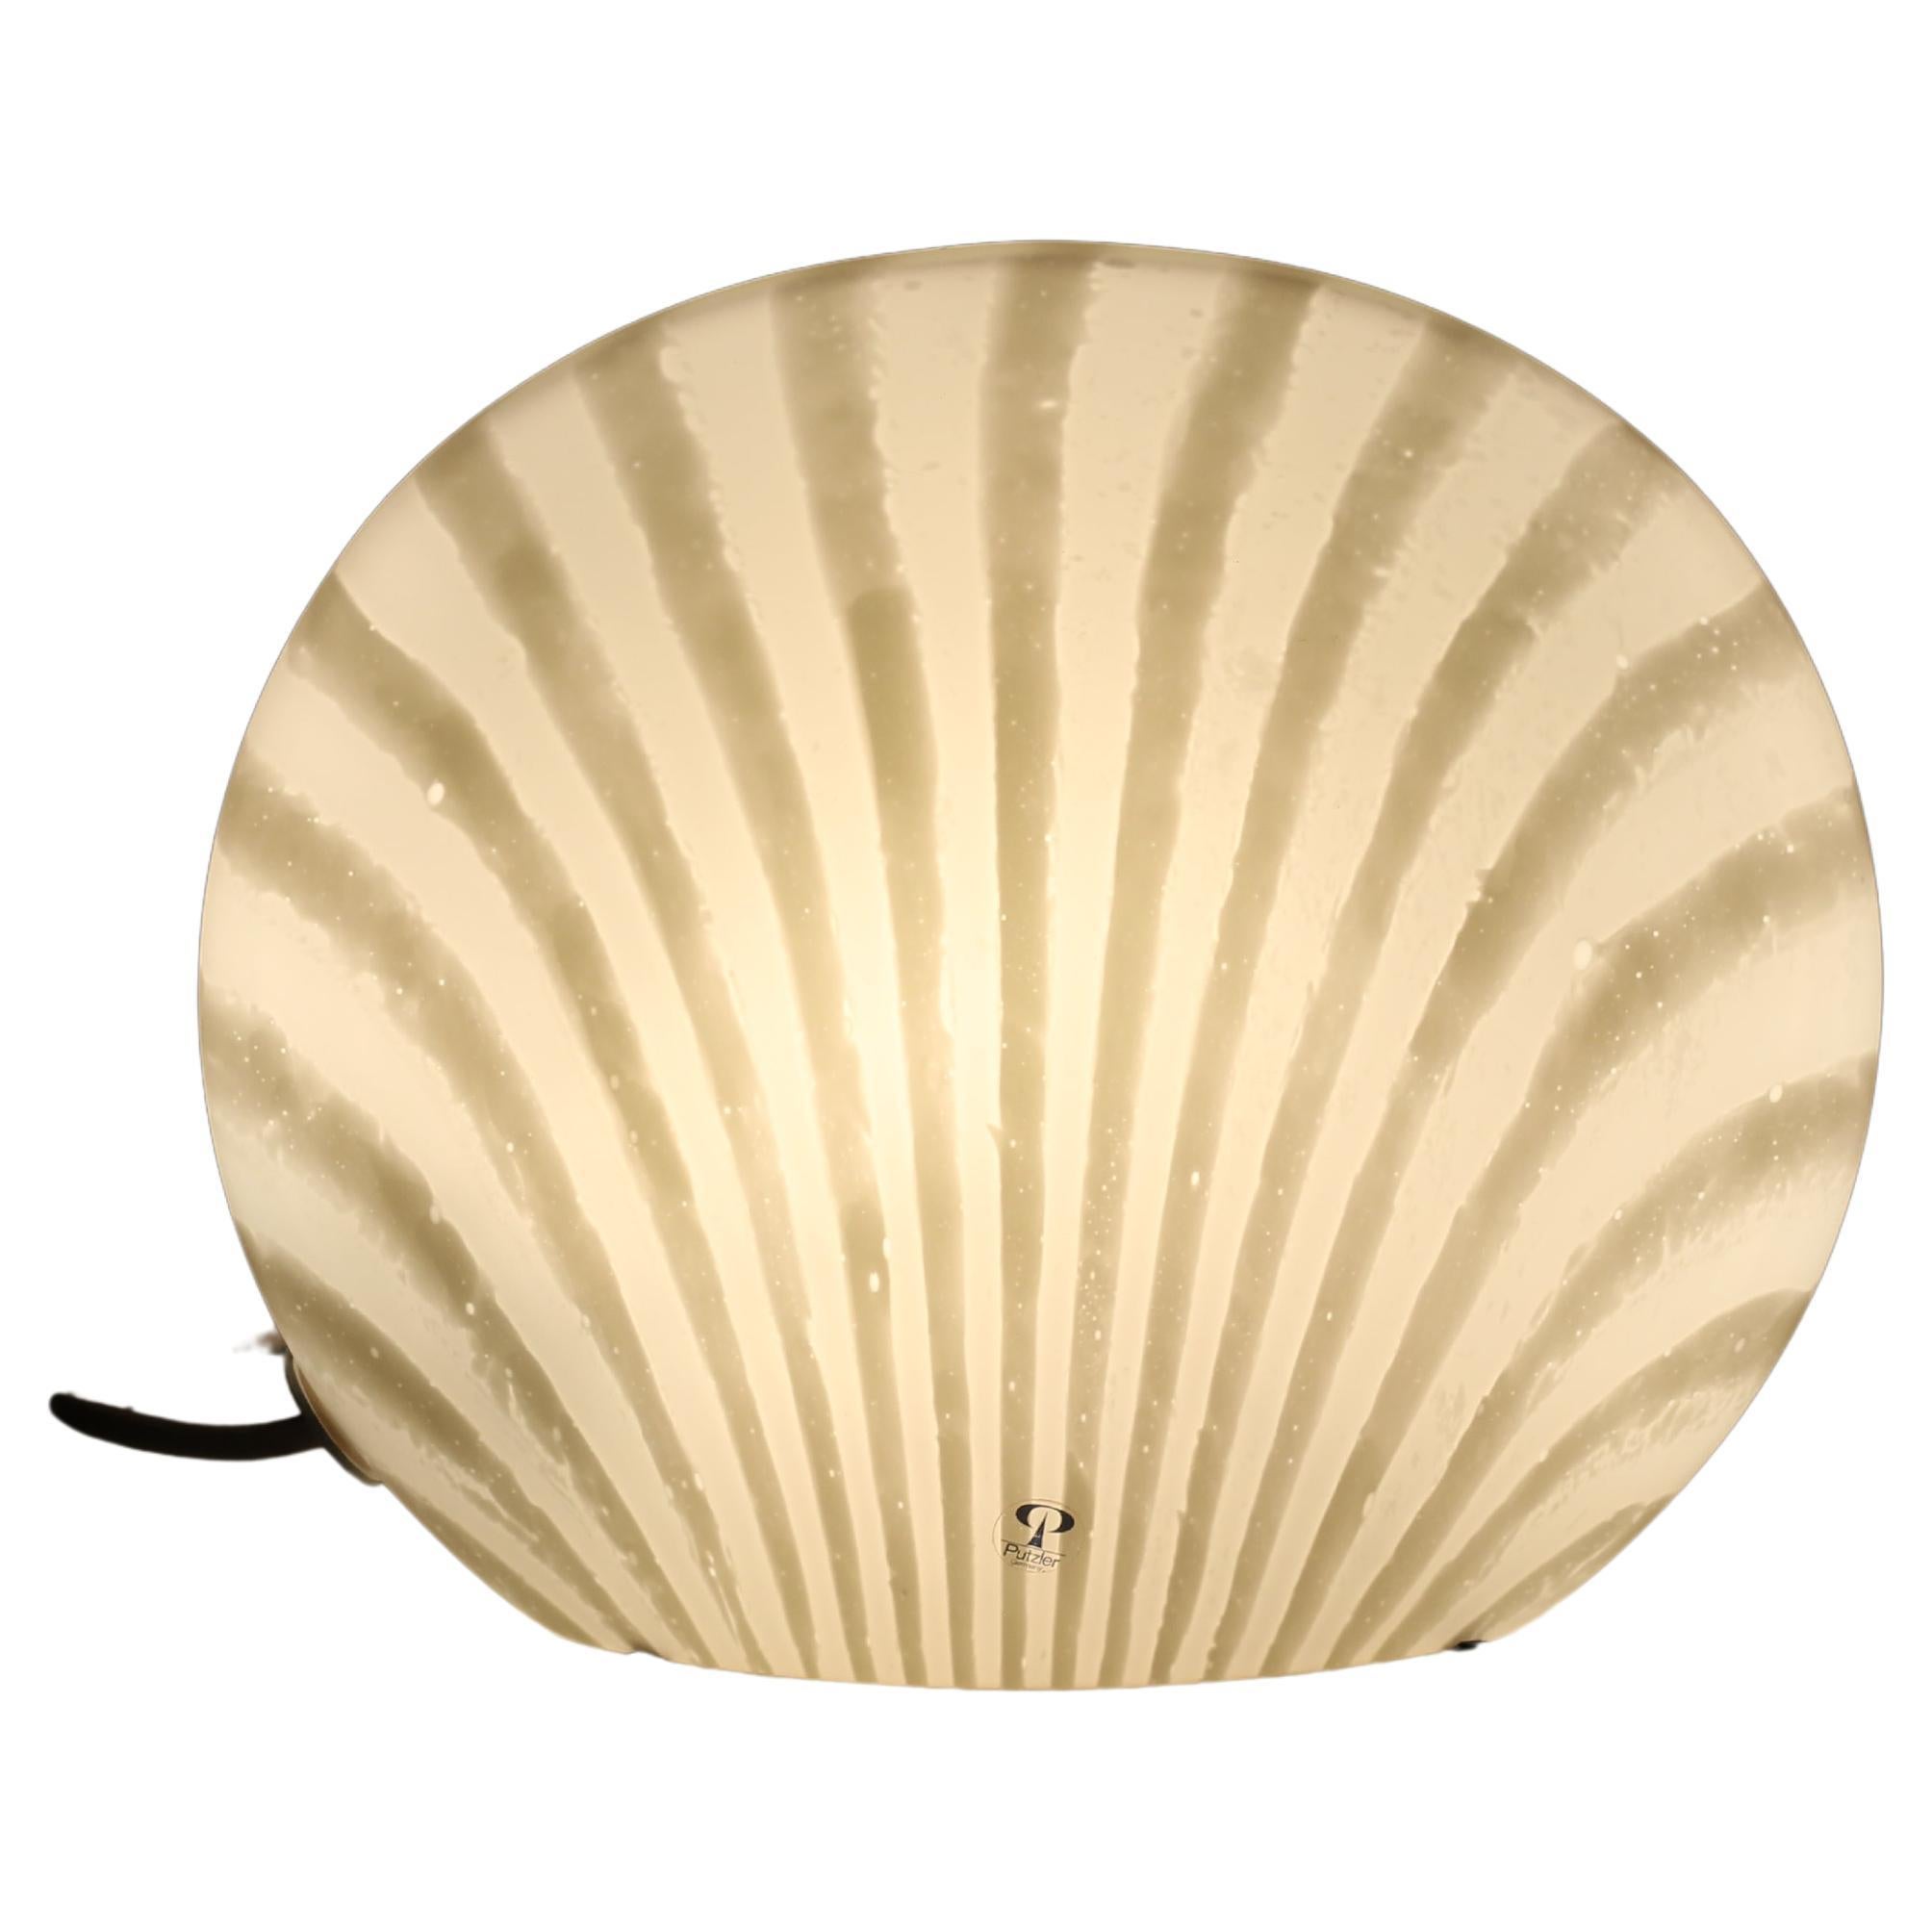 A Mid-Century Modern Peill & Putzler glass sea shell desk light or table light made in West Germany, in or around the 1960’s. 

This highly tactile and very smooth to the touch seashell light is made from a seamless piece of continuous flowing